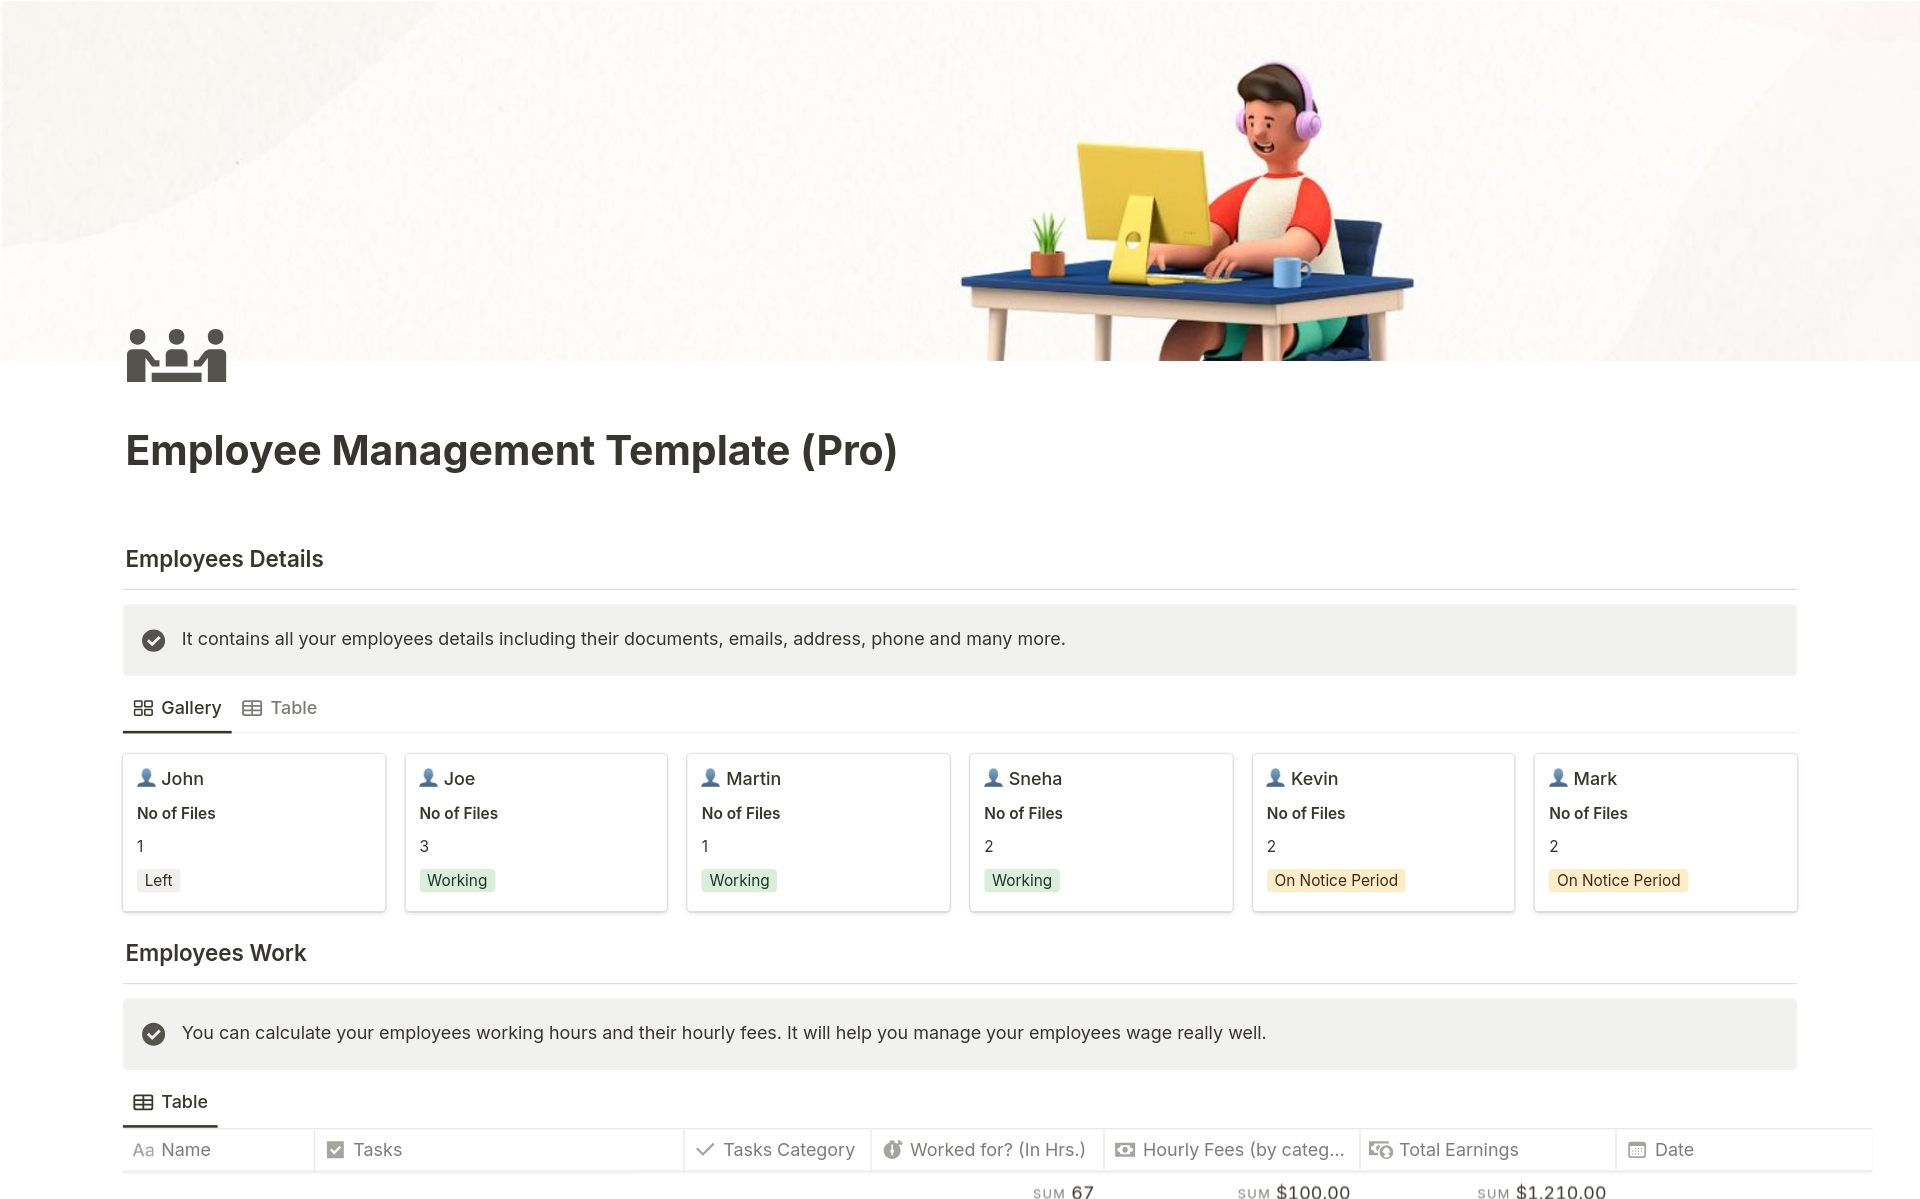 Introducing our new Employee Management System (Pro), an advanced solution for your workforce management. Whether you're a small startup or a growing enterprise, this customizable template is the perfect solution for you.